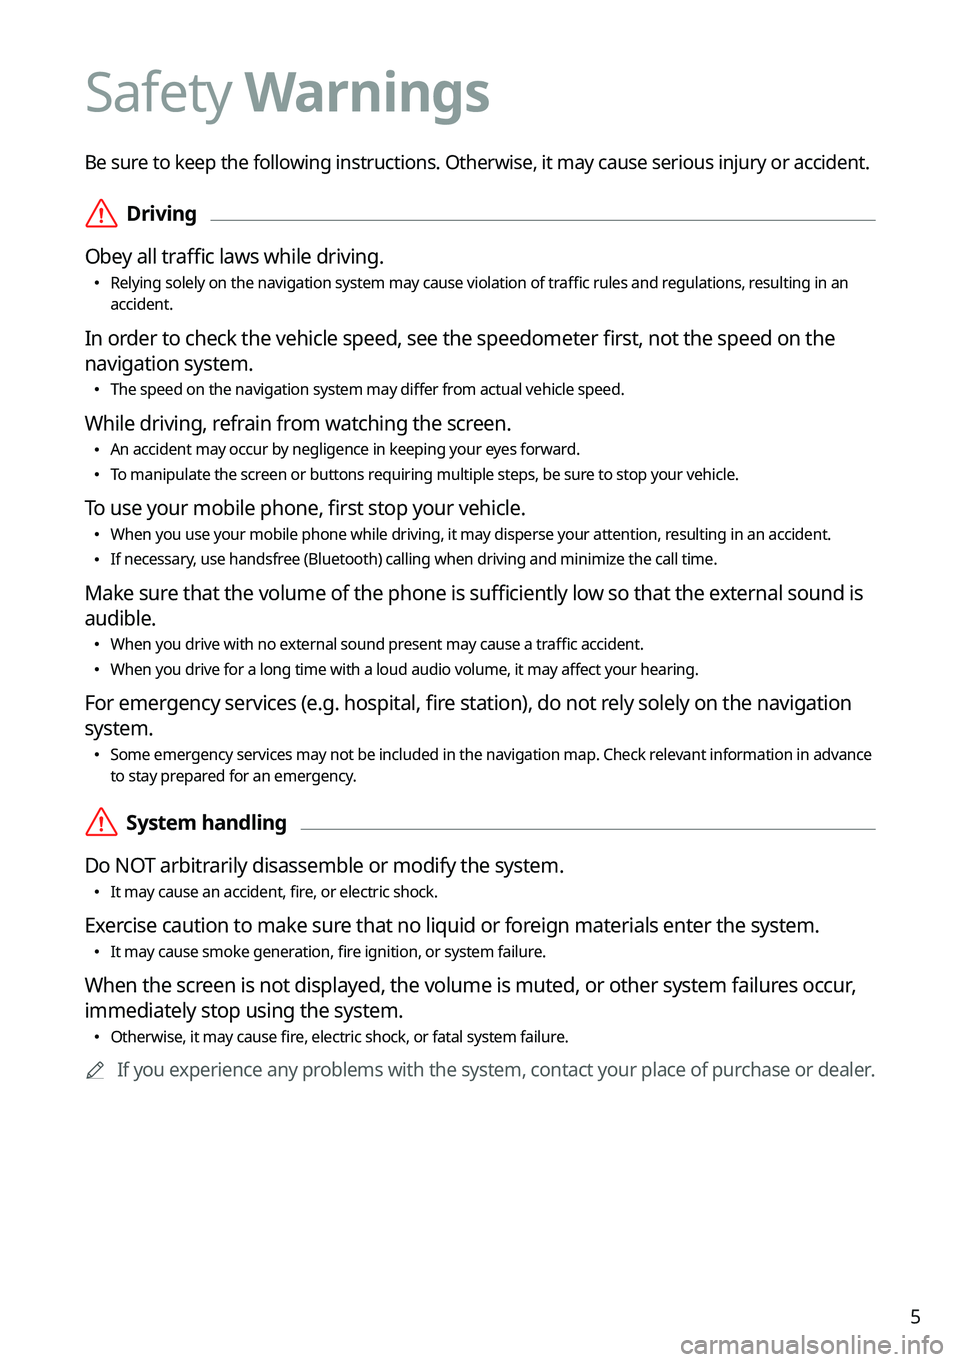 KIA SORENTO 2022  Navigation System Quick Reference Guide 5
Be sure to keep the following instructions. Otherwise, it may cause serious injury or accident.
 \335Driving
Obey all traffic laws while driving.
 \225 Relying solely on the navigation system may ca